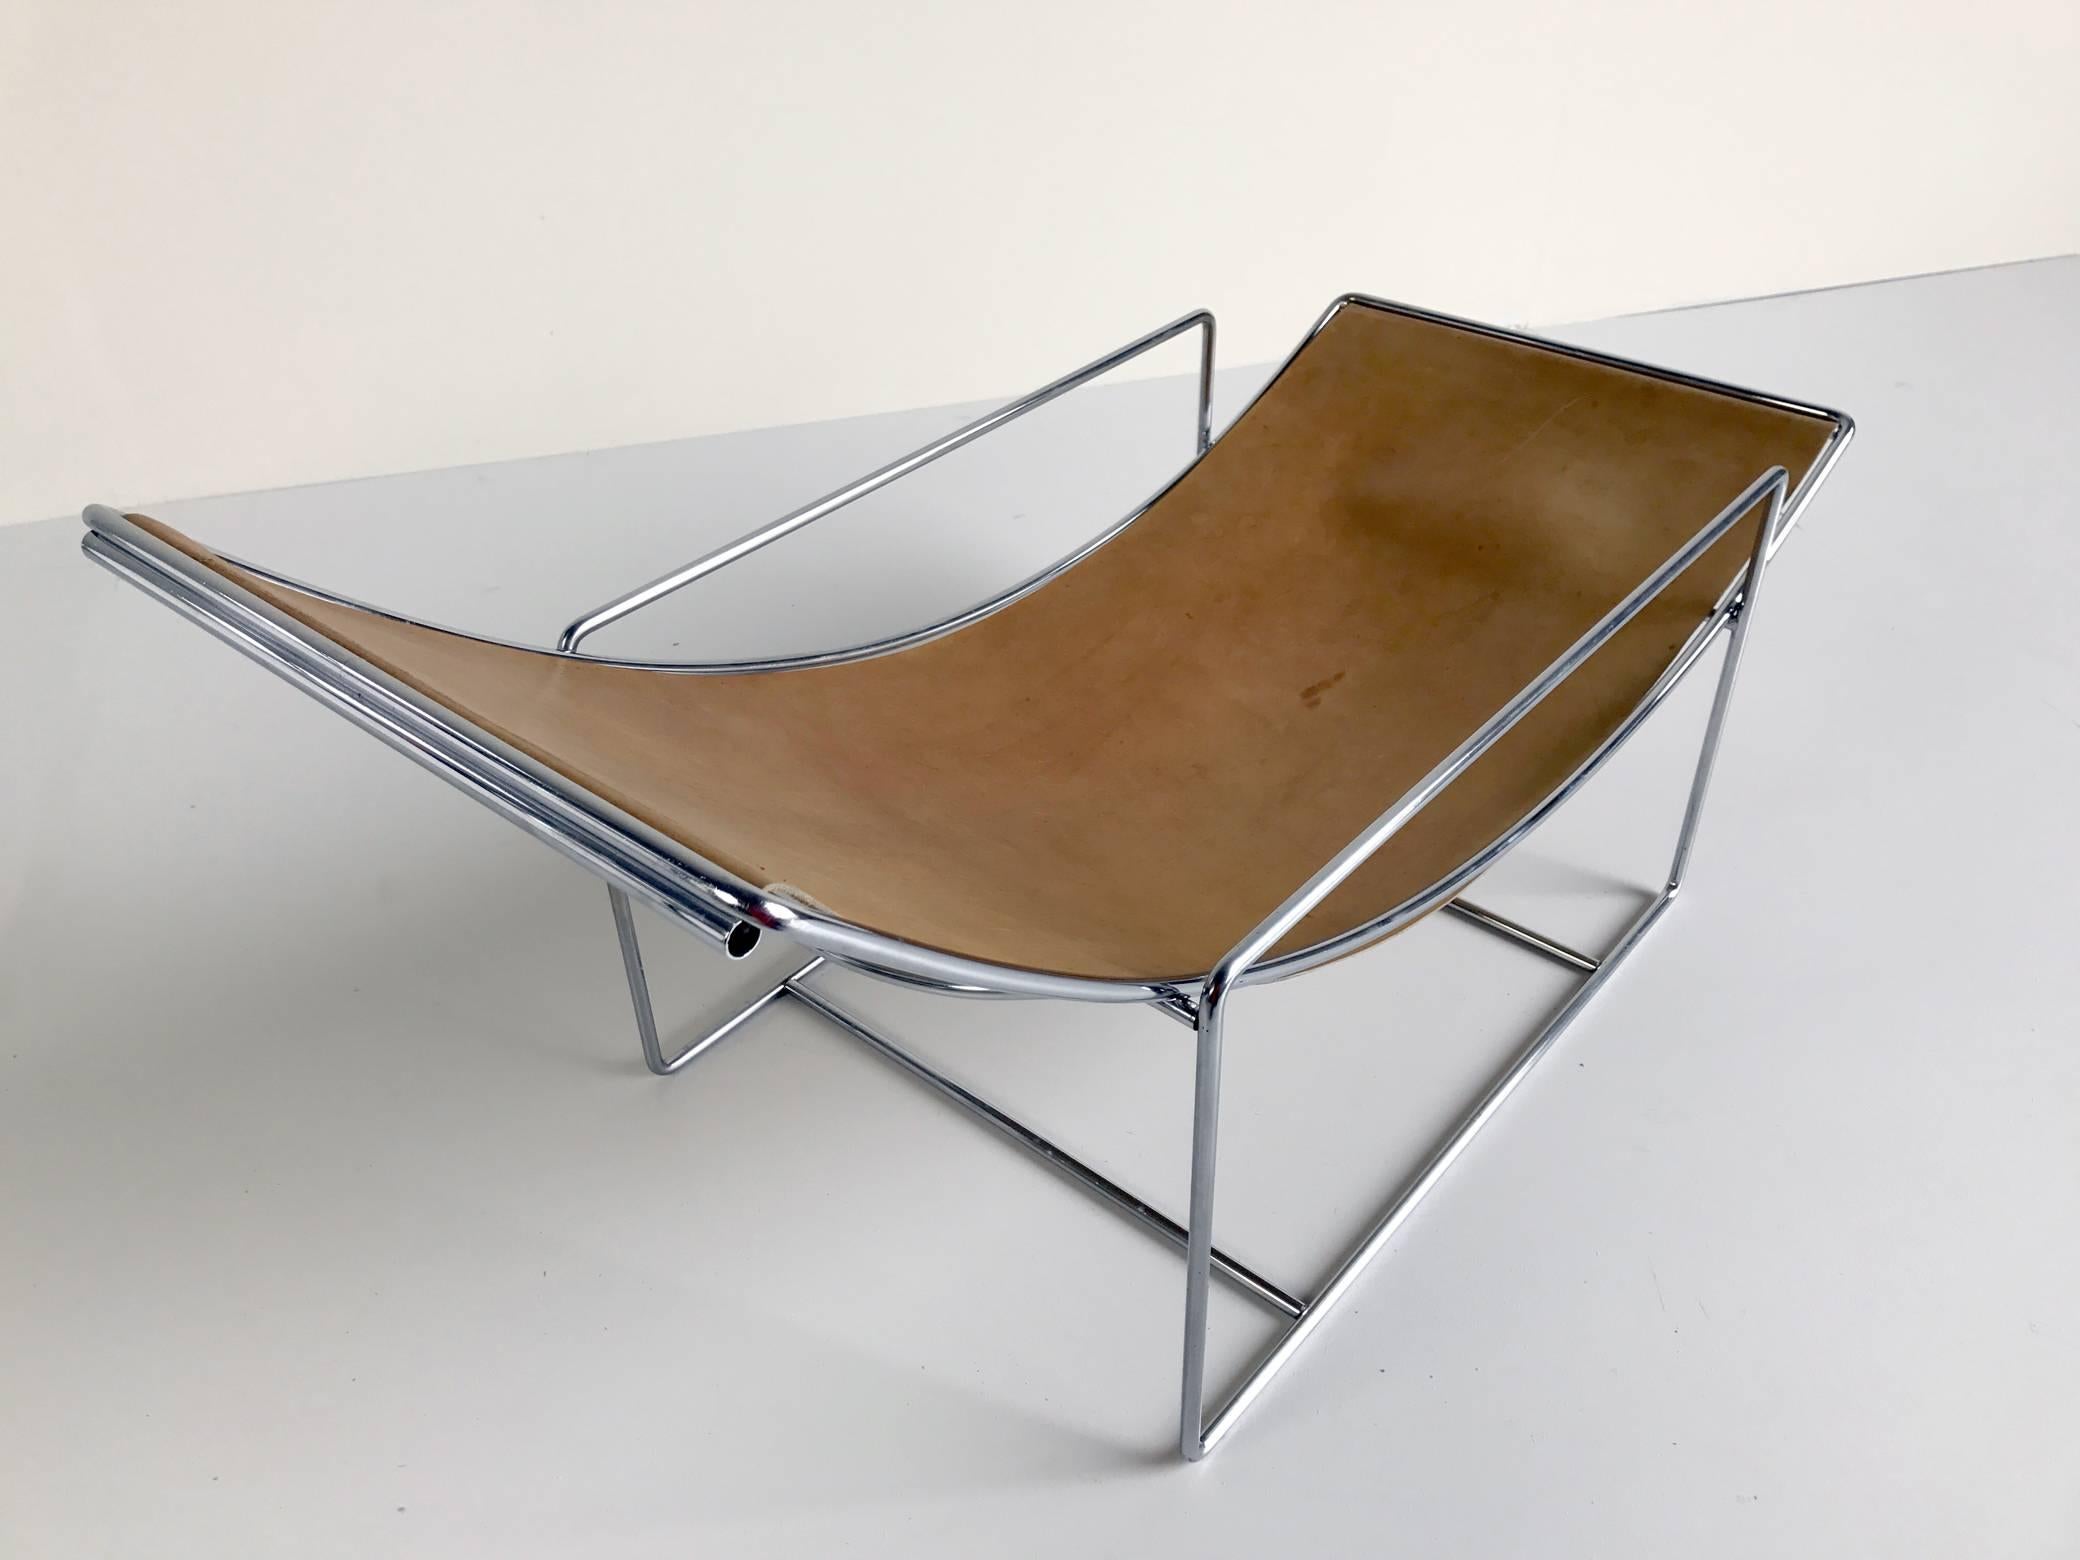 This chaise longue in taut leather and chrome-plated tubular metal dates back to the 1970s. It is designed in two independent parts. The base is fitted with a sliding seat that can be positioned as desired.
The Minimalist design gives it a